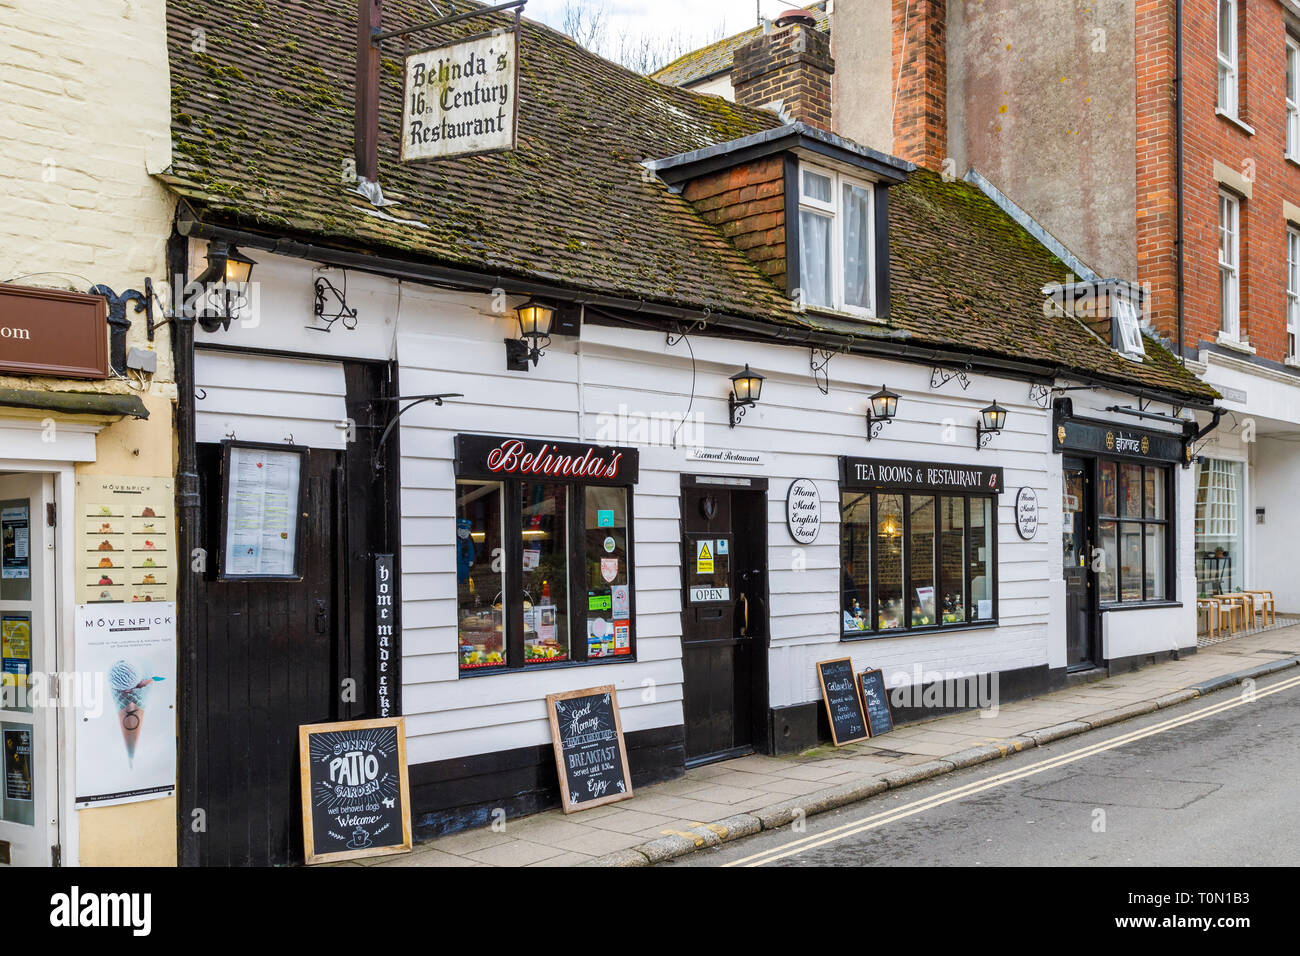 17th century timber framed and weather-boarded property, Belinda's Restaurant, in Arundel, West Sussex, UK. Stock Photo